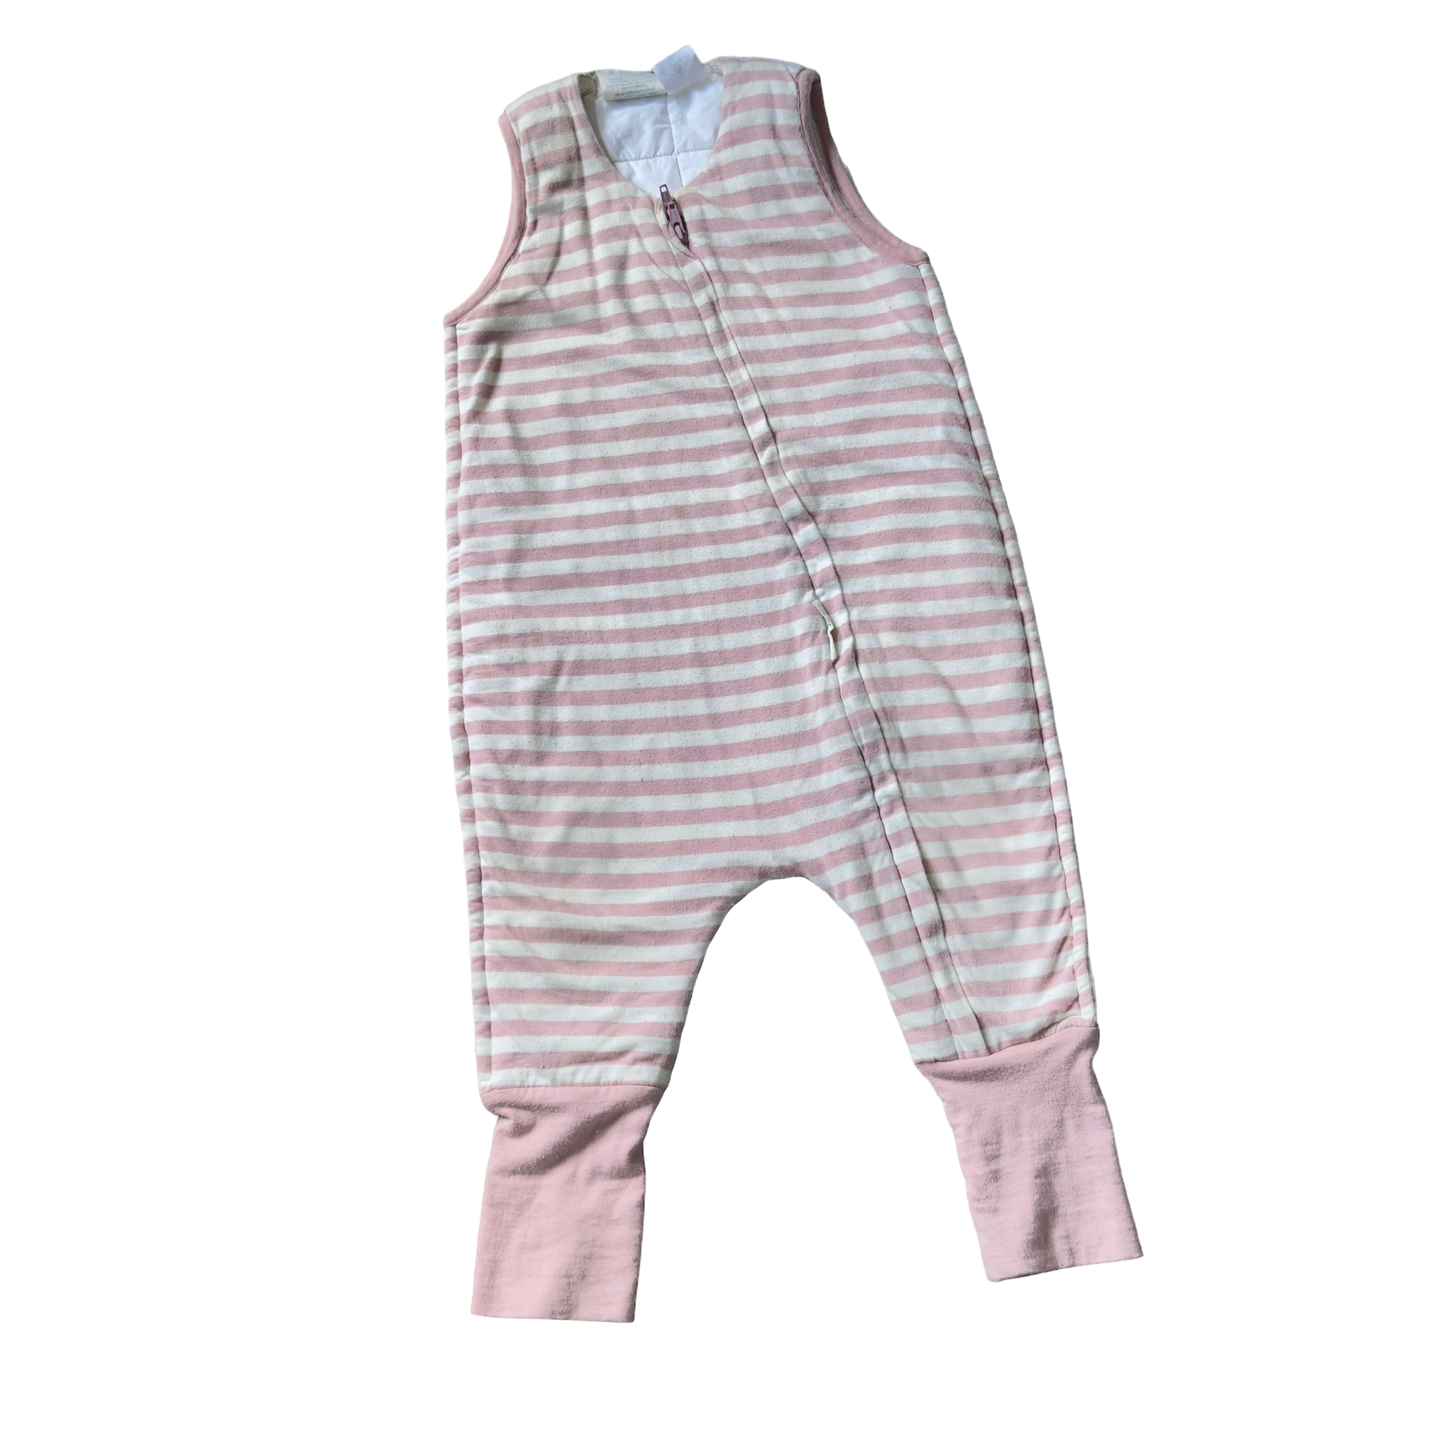 Woolbabe sleep suit | 2 years | pink & white stripped | GUC